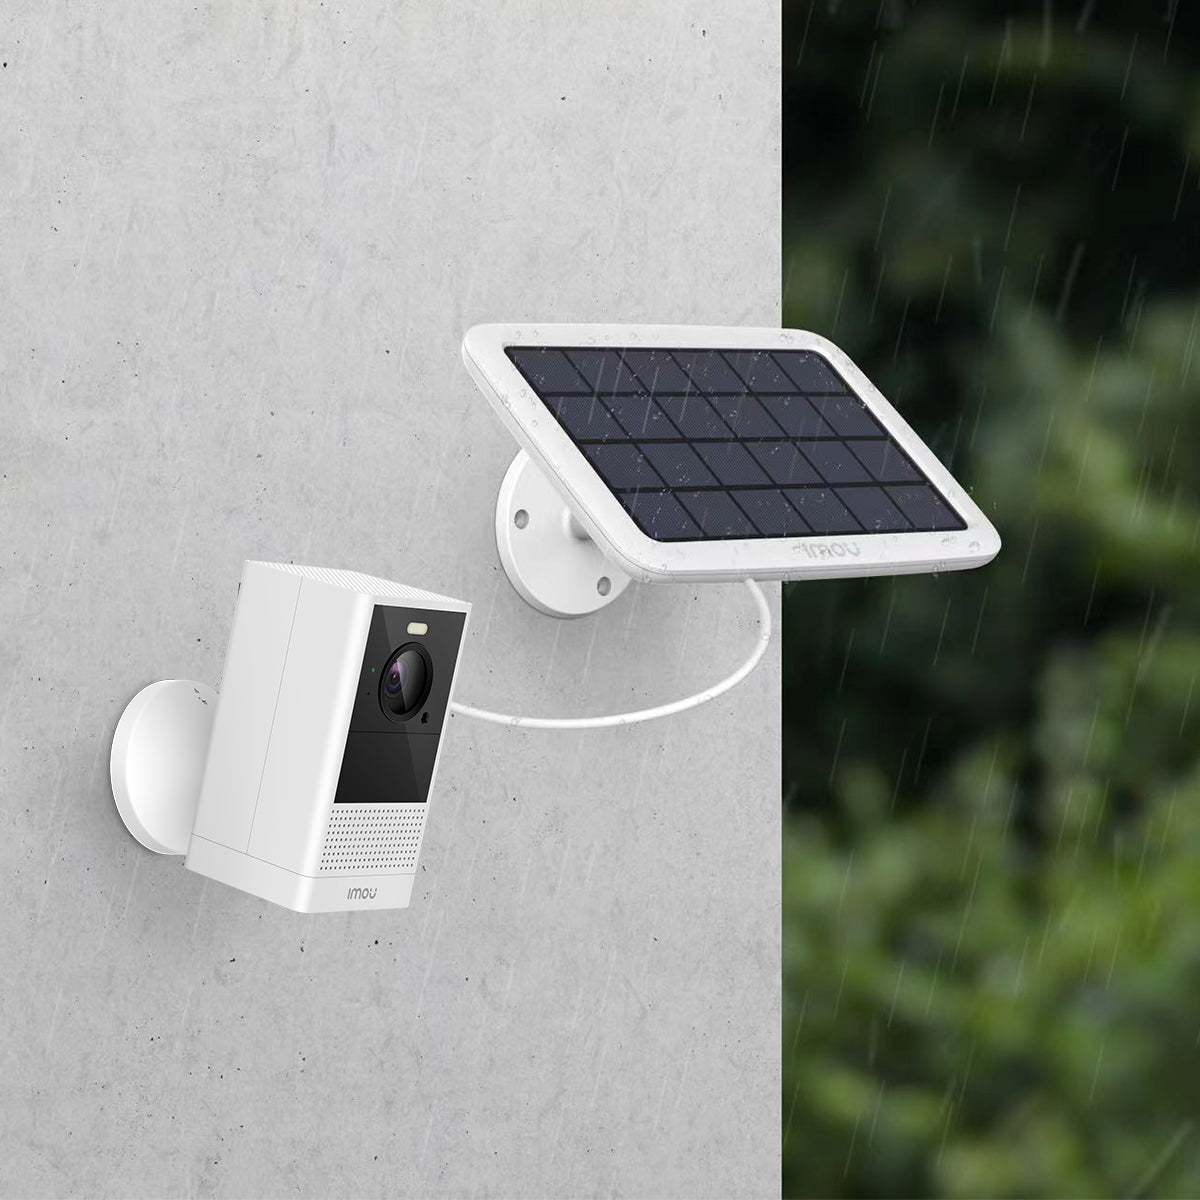 Imou Cell 2 4MP Battery Operated Wi-Fi Camera + Solar Panel Kit IPC-B46LP-White and FSP11 Cell 2 and Solar Panel Installed Outside with illustration of weather conditions CC473-6 and PS470 